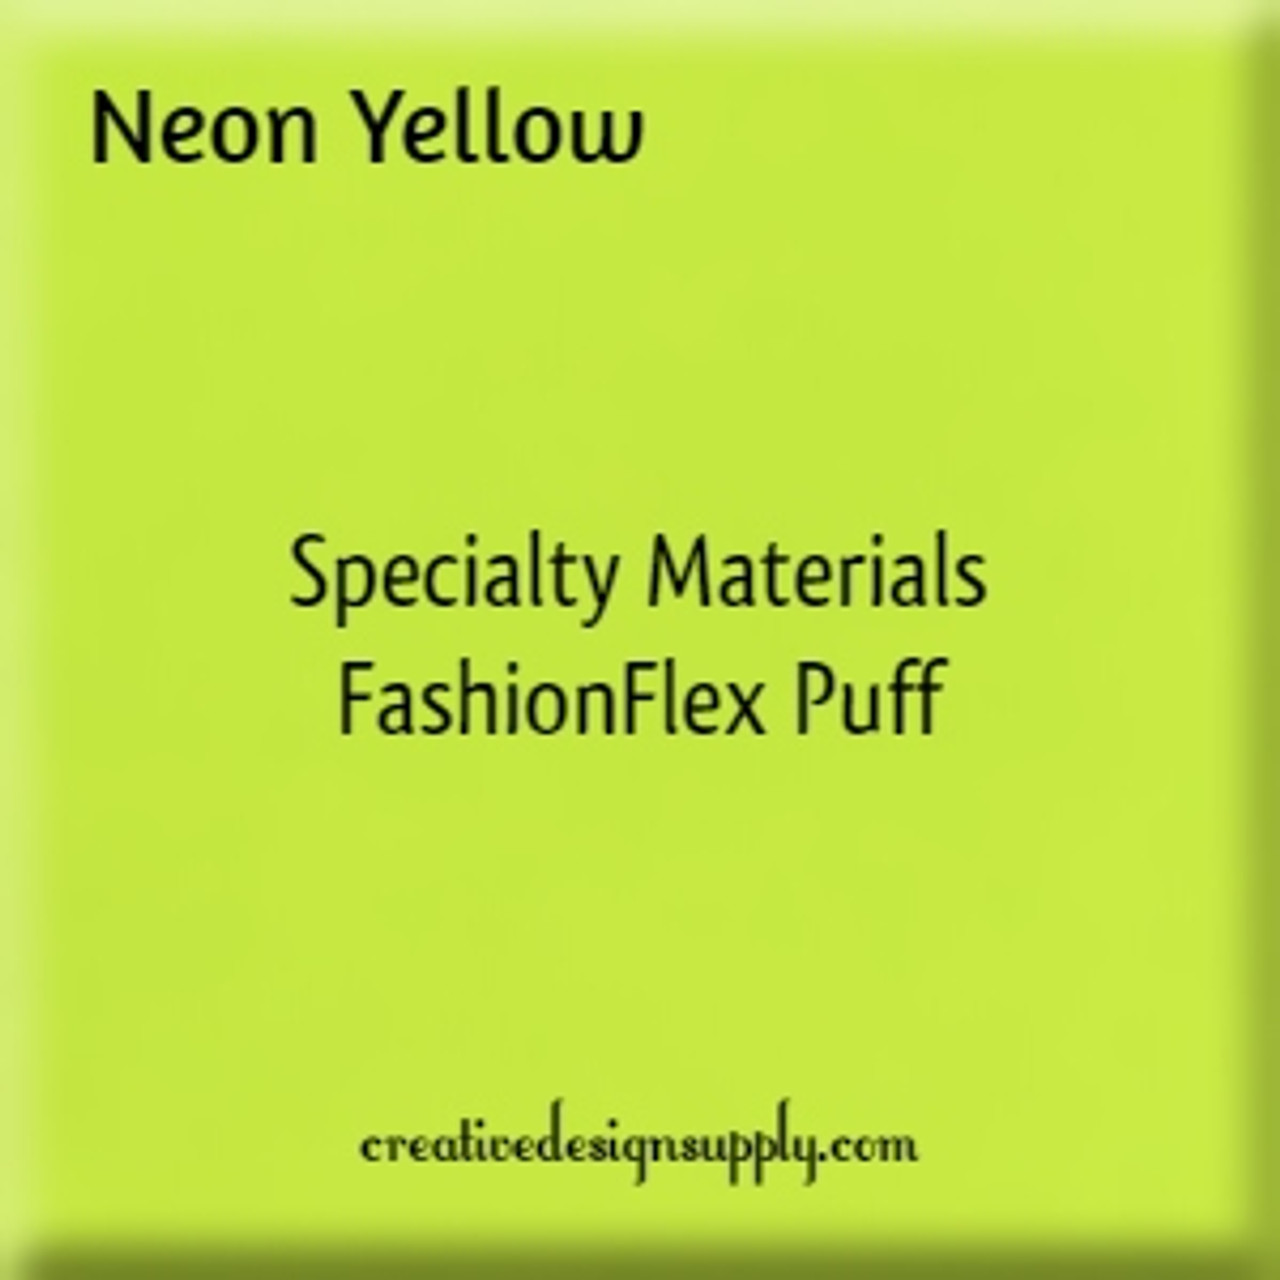 Specialty Materials™ FashionFlex® Puff | Neon Yellow